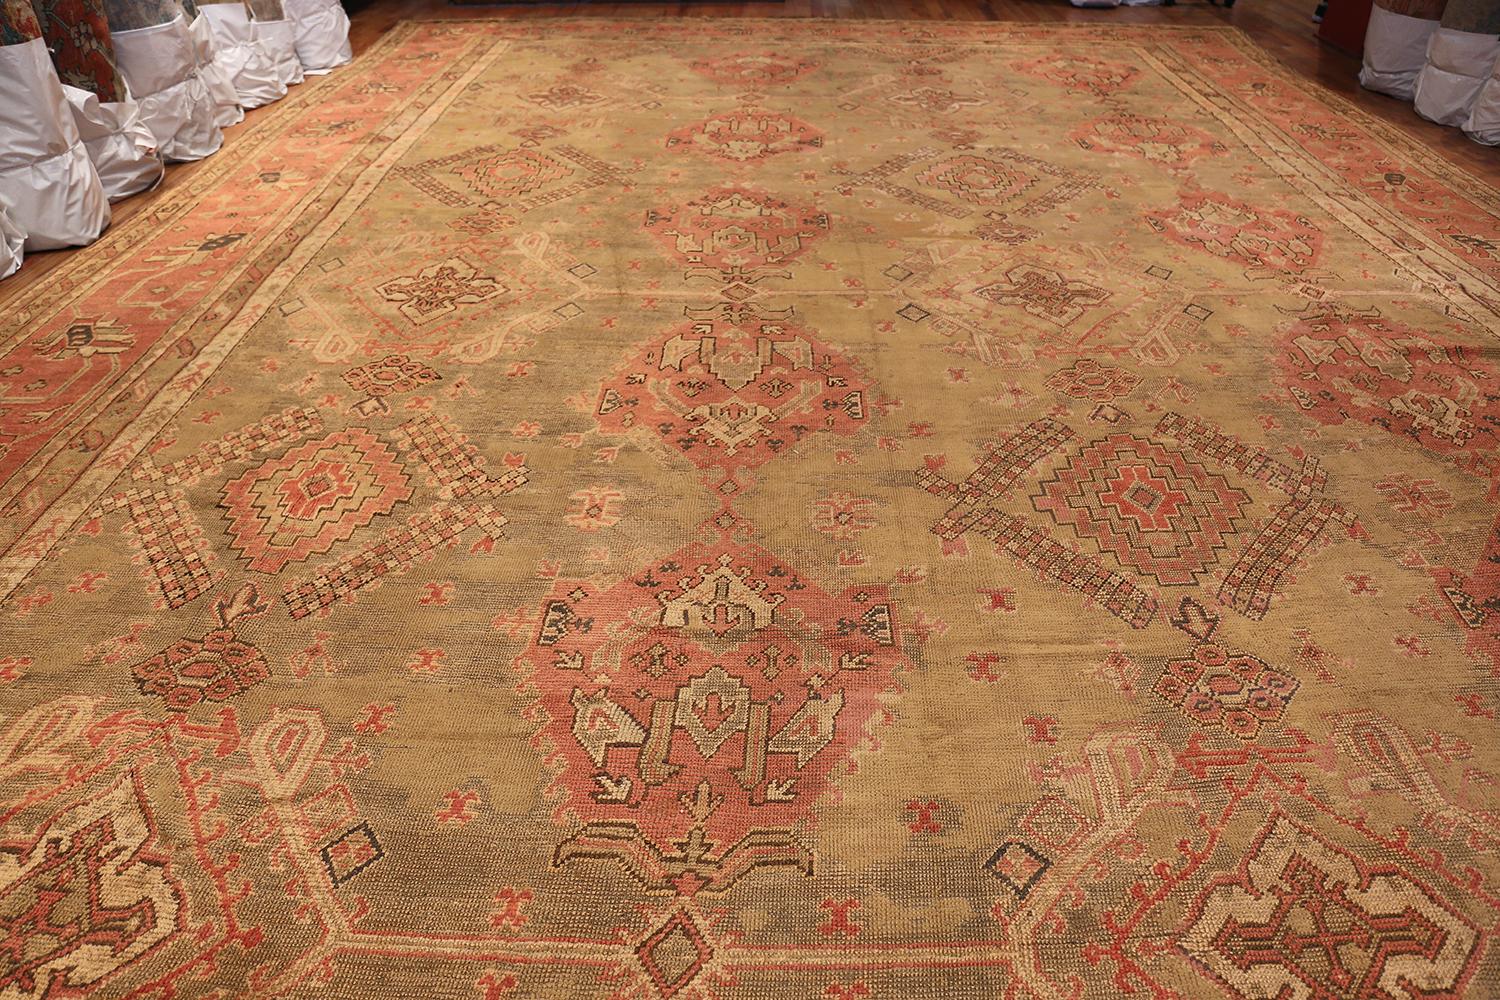 Tribal Oversized Antique Turkish Oushak Rug, Country of Origin: Turkey, Circa Date: 1900 — Size: 16 ft 3 in x 24 ft 7 in (4.95 m x 7.49 m).